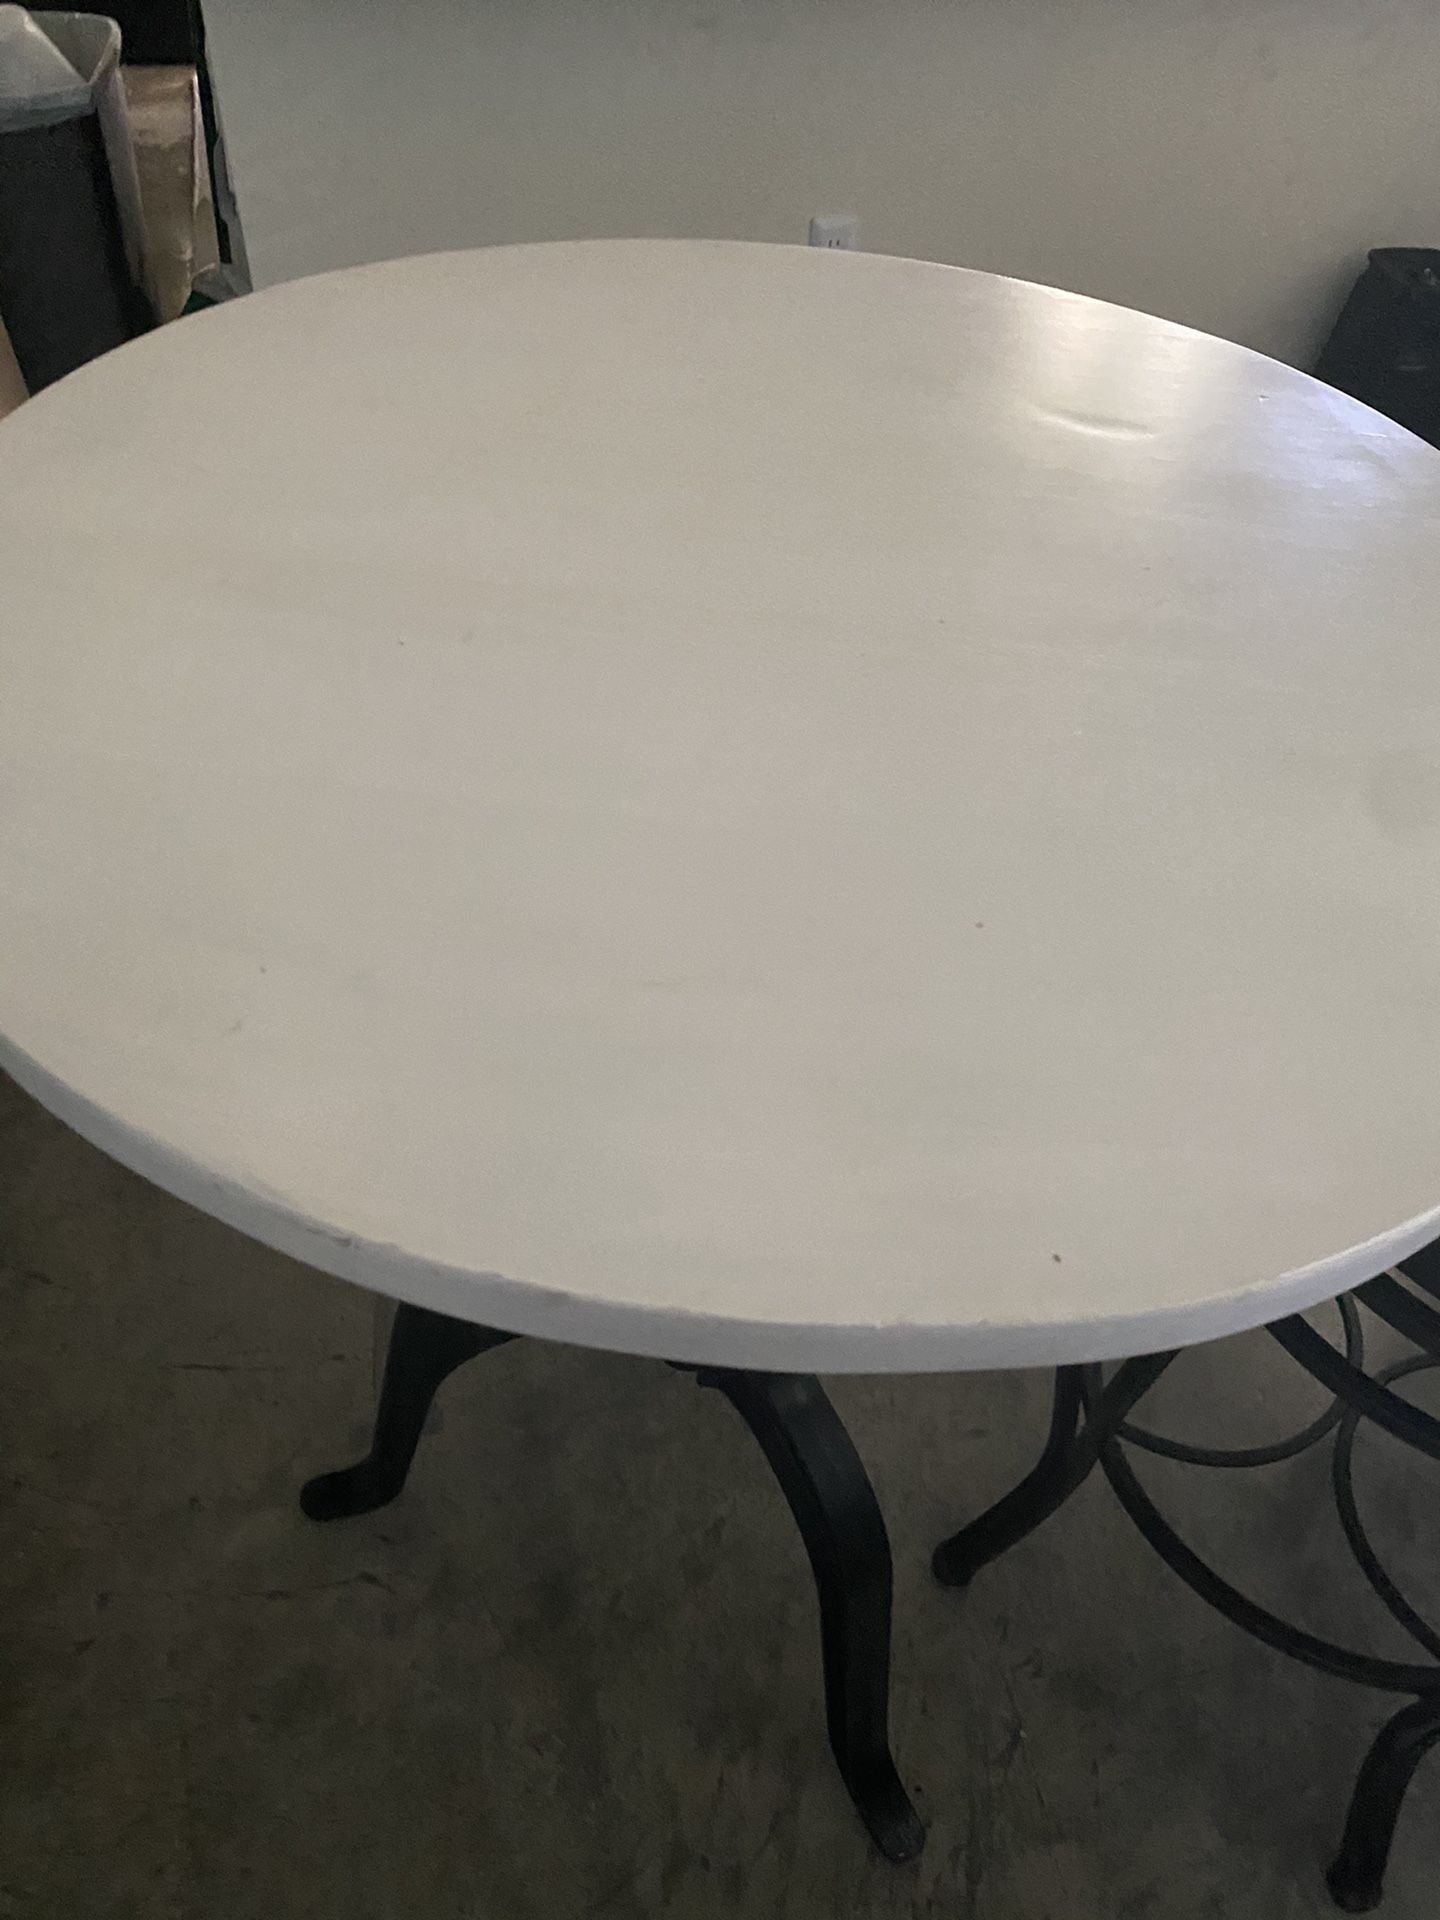 Crank dining table